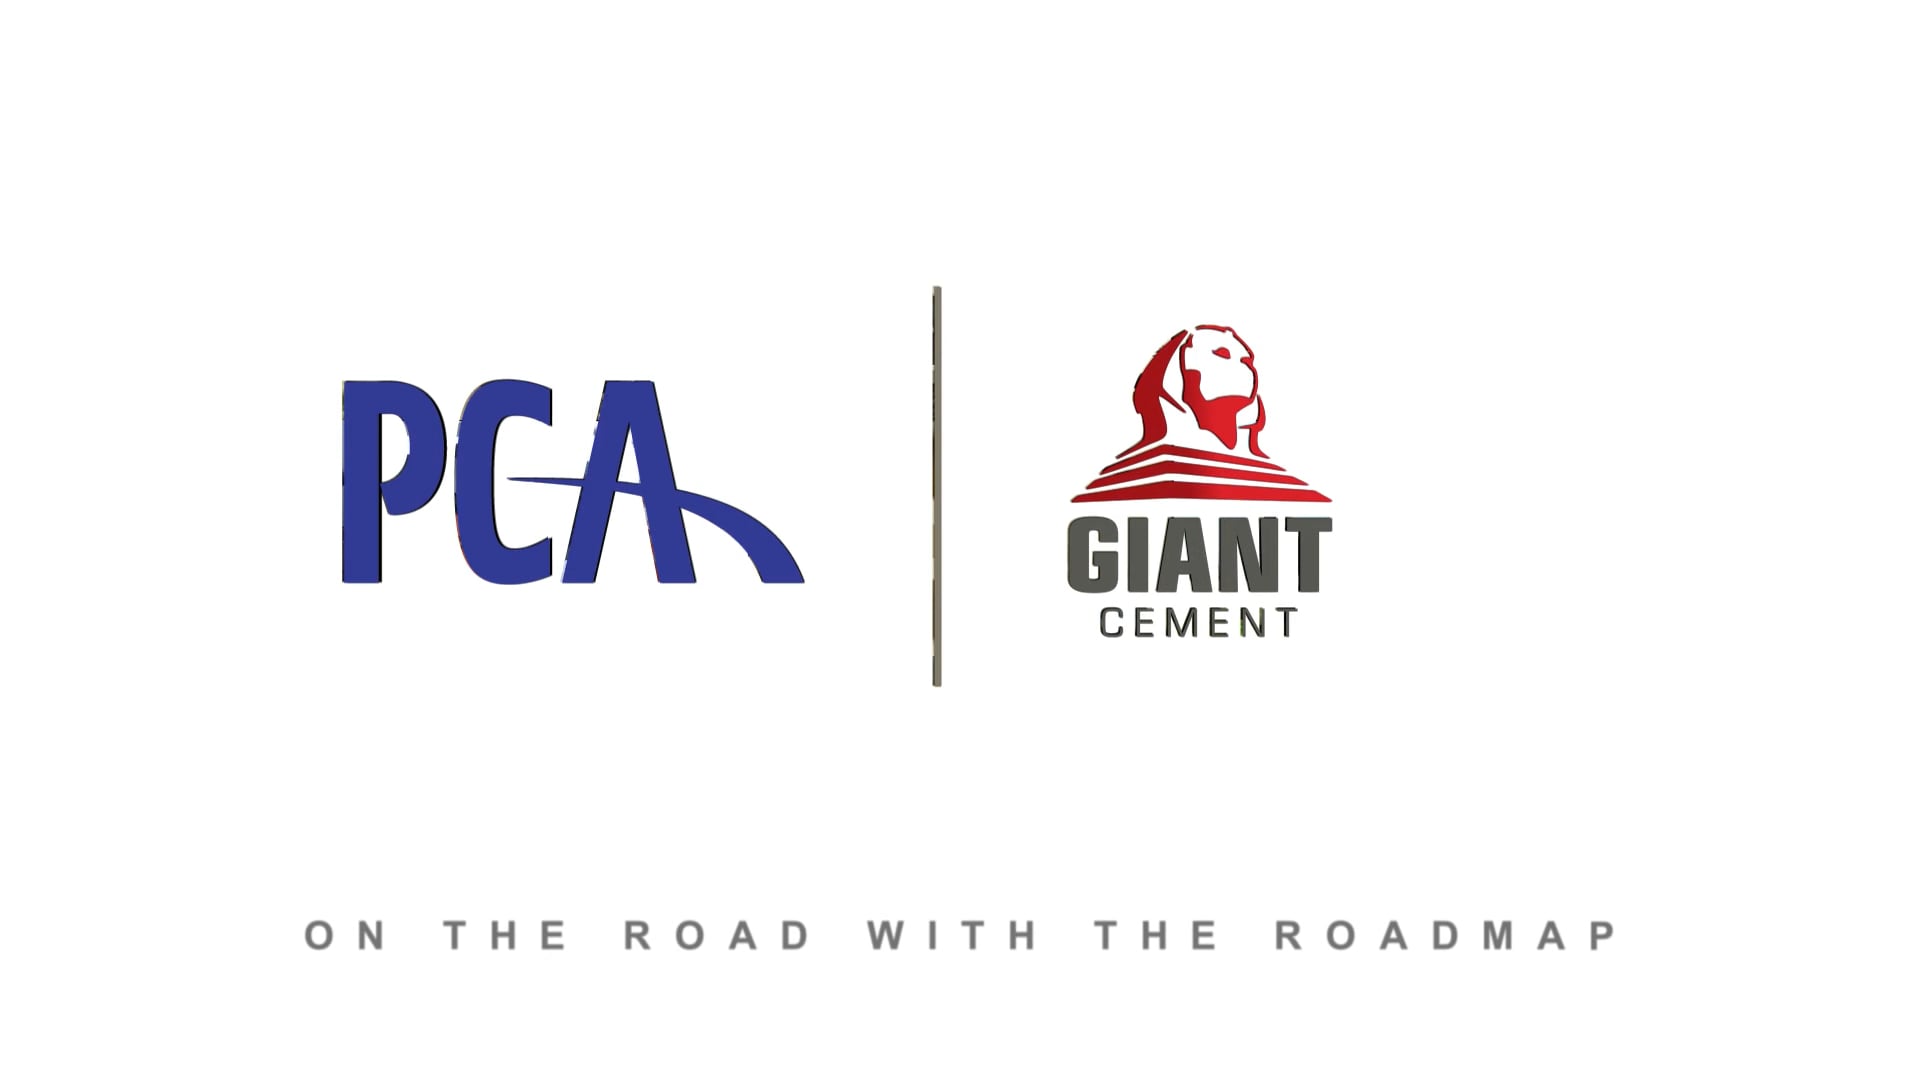 Tim Kuebler of Giant Cement – On the Road with the Roadmap